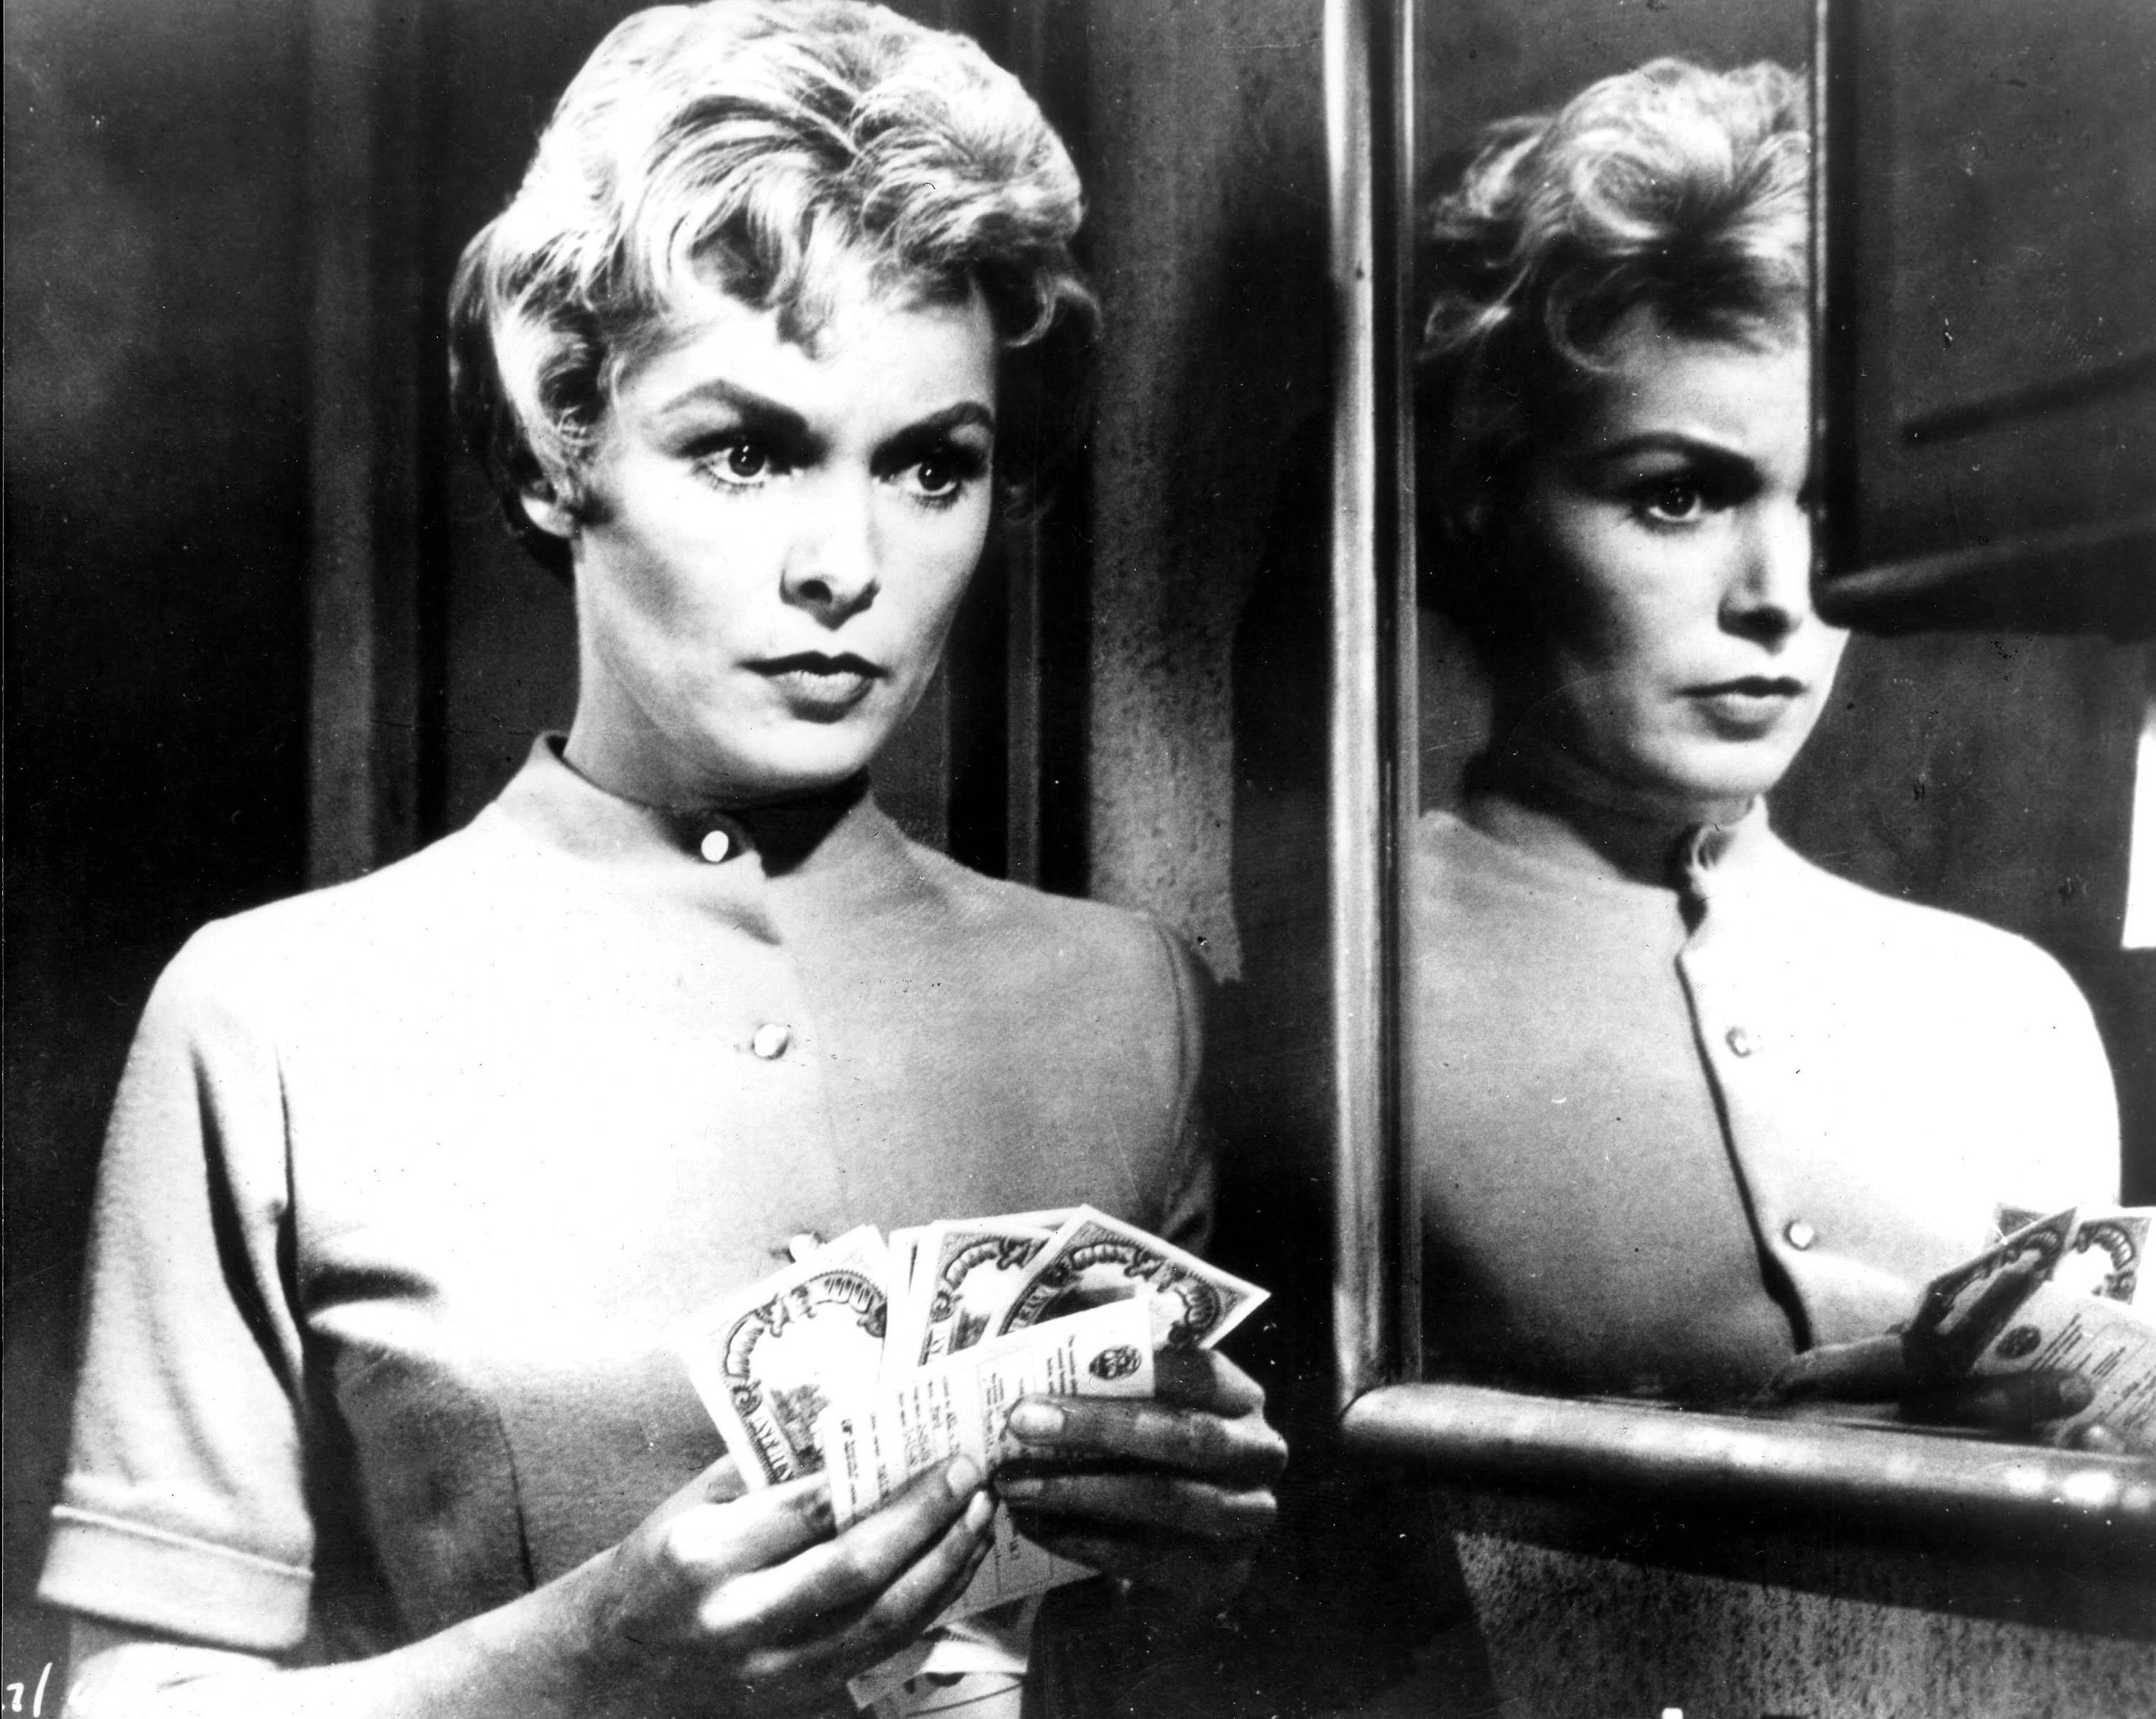 Janet Leigh counts money in a mirror